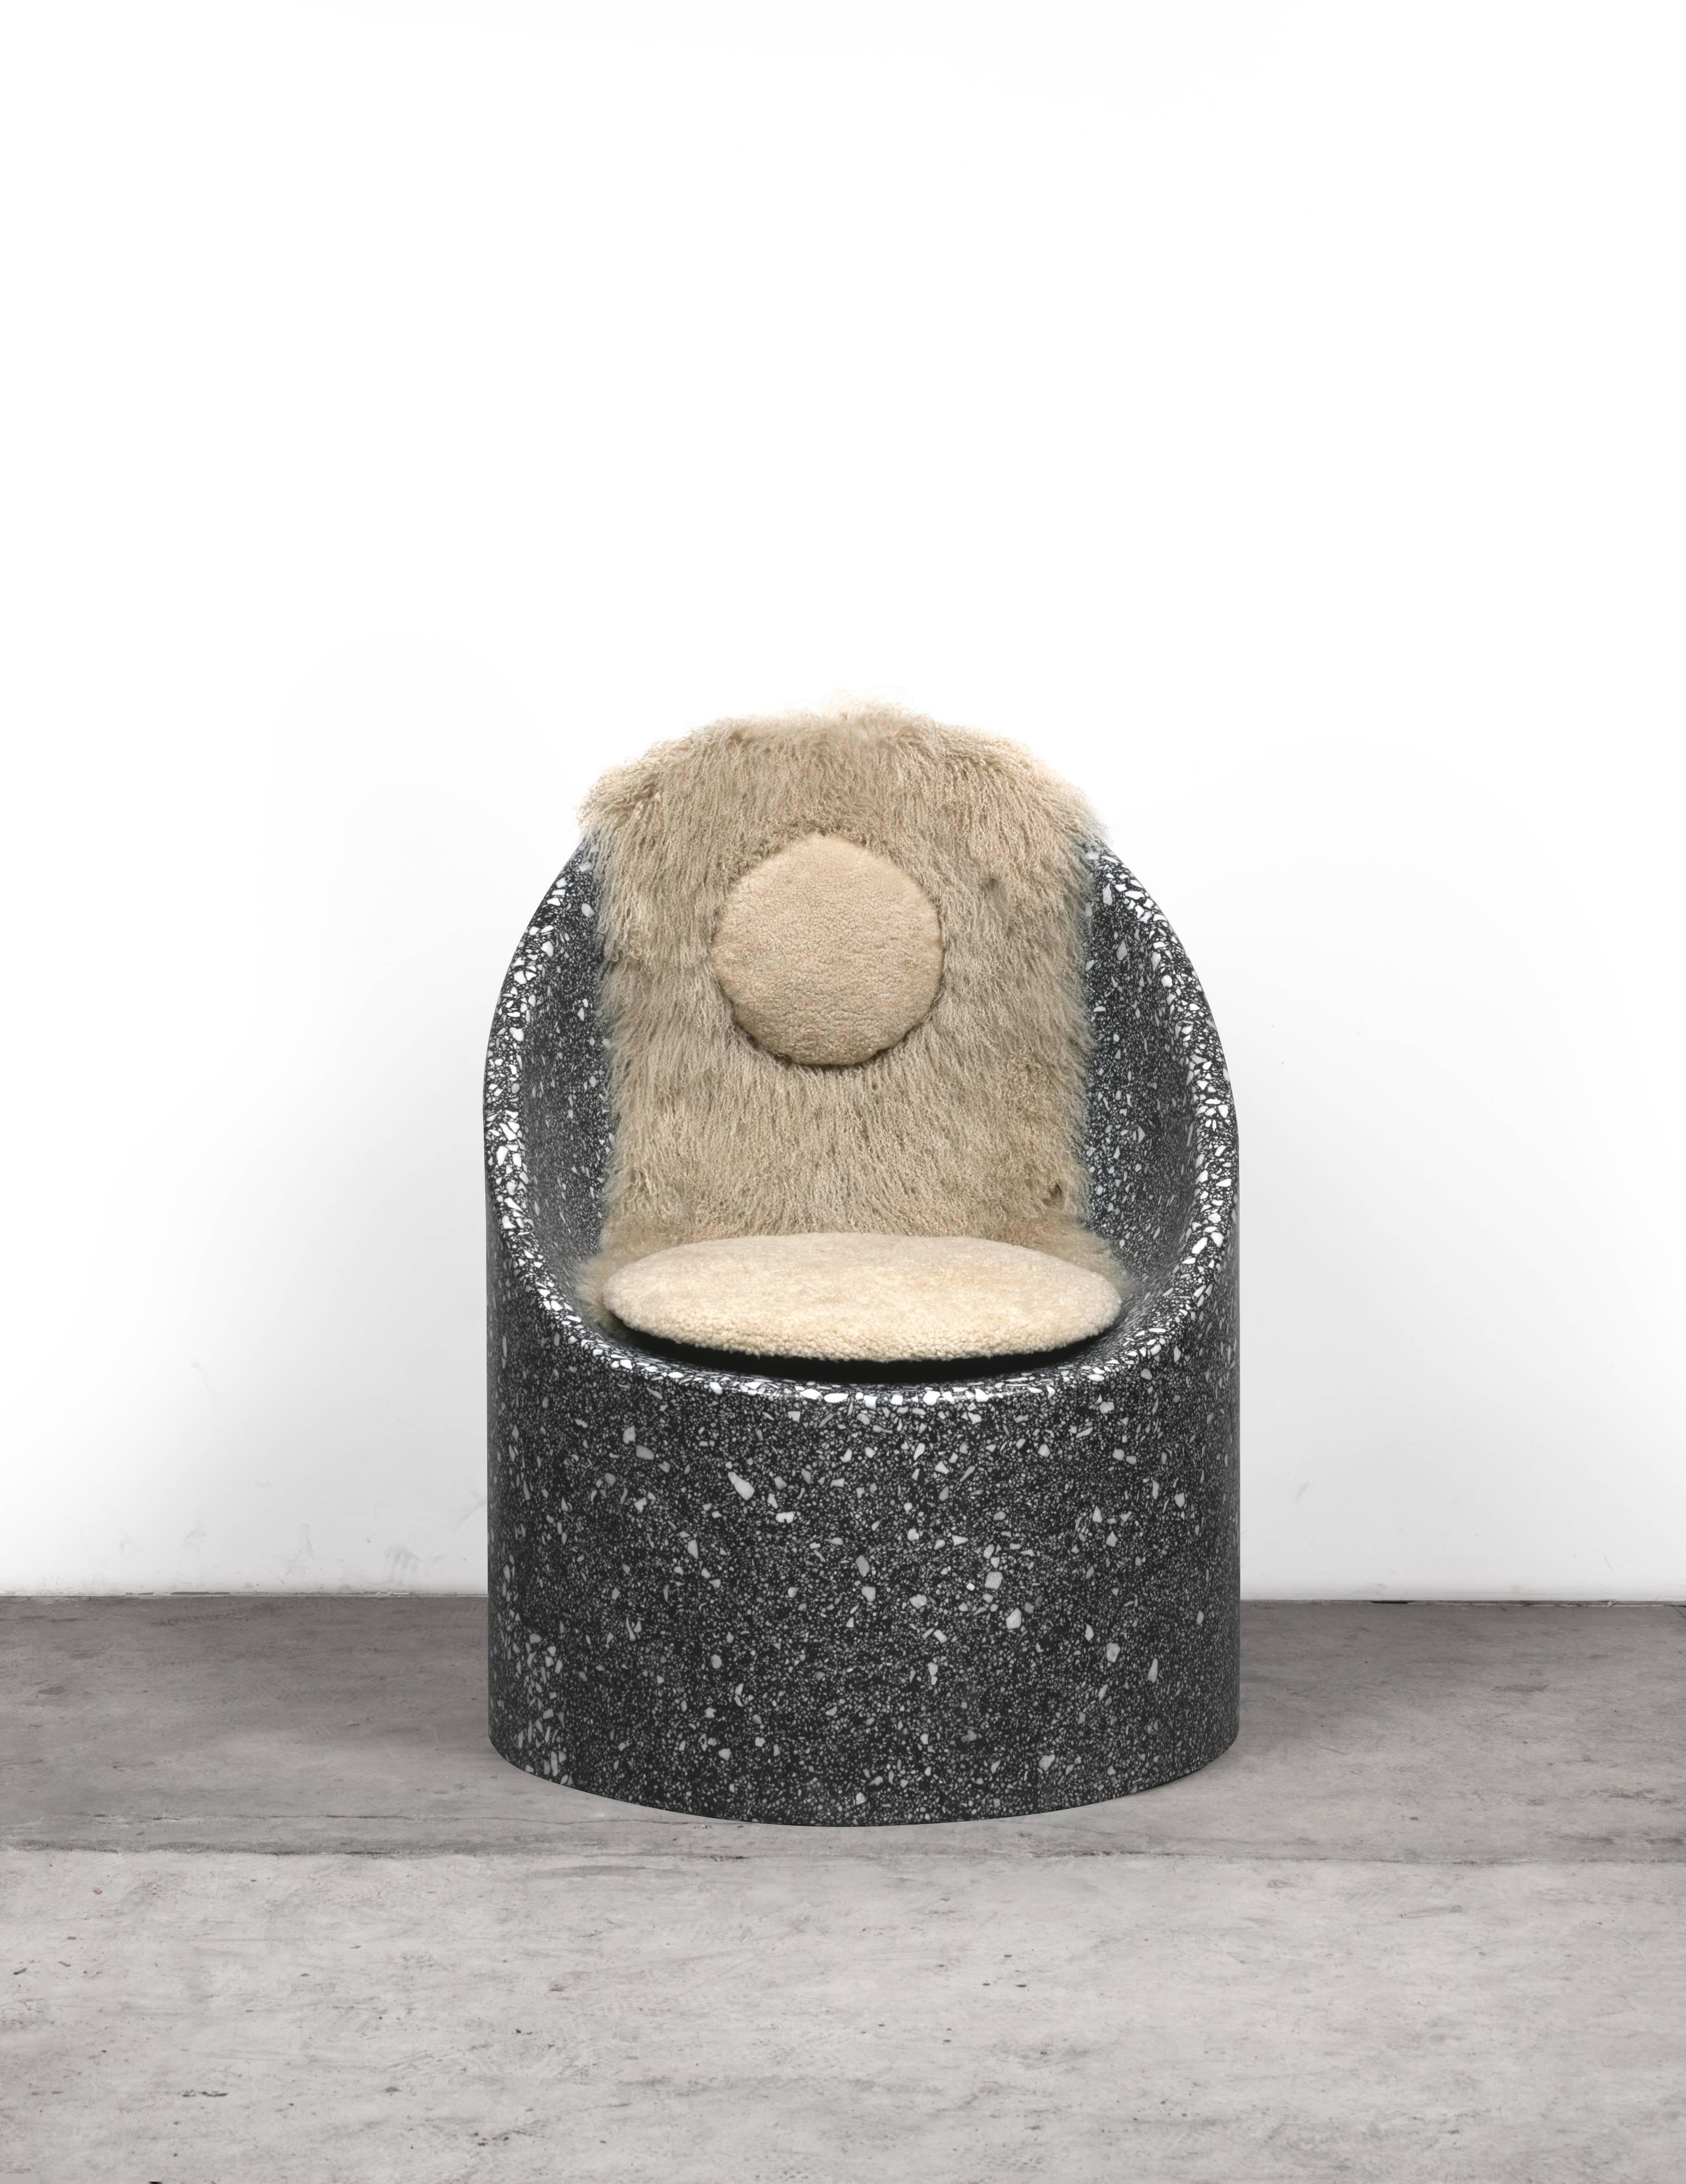 Modern Sculptural Cozy Cave Chair in Black Cement/White Marble Terrazzo with Sheepskin For Sale